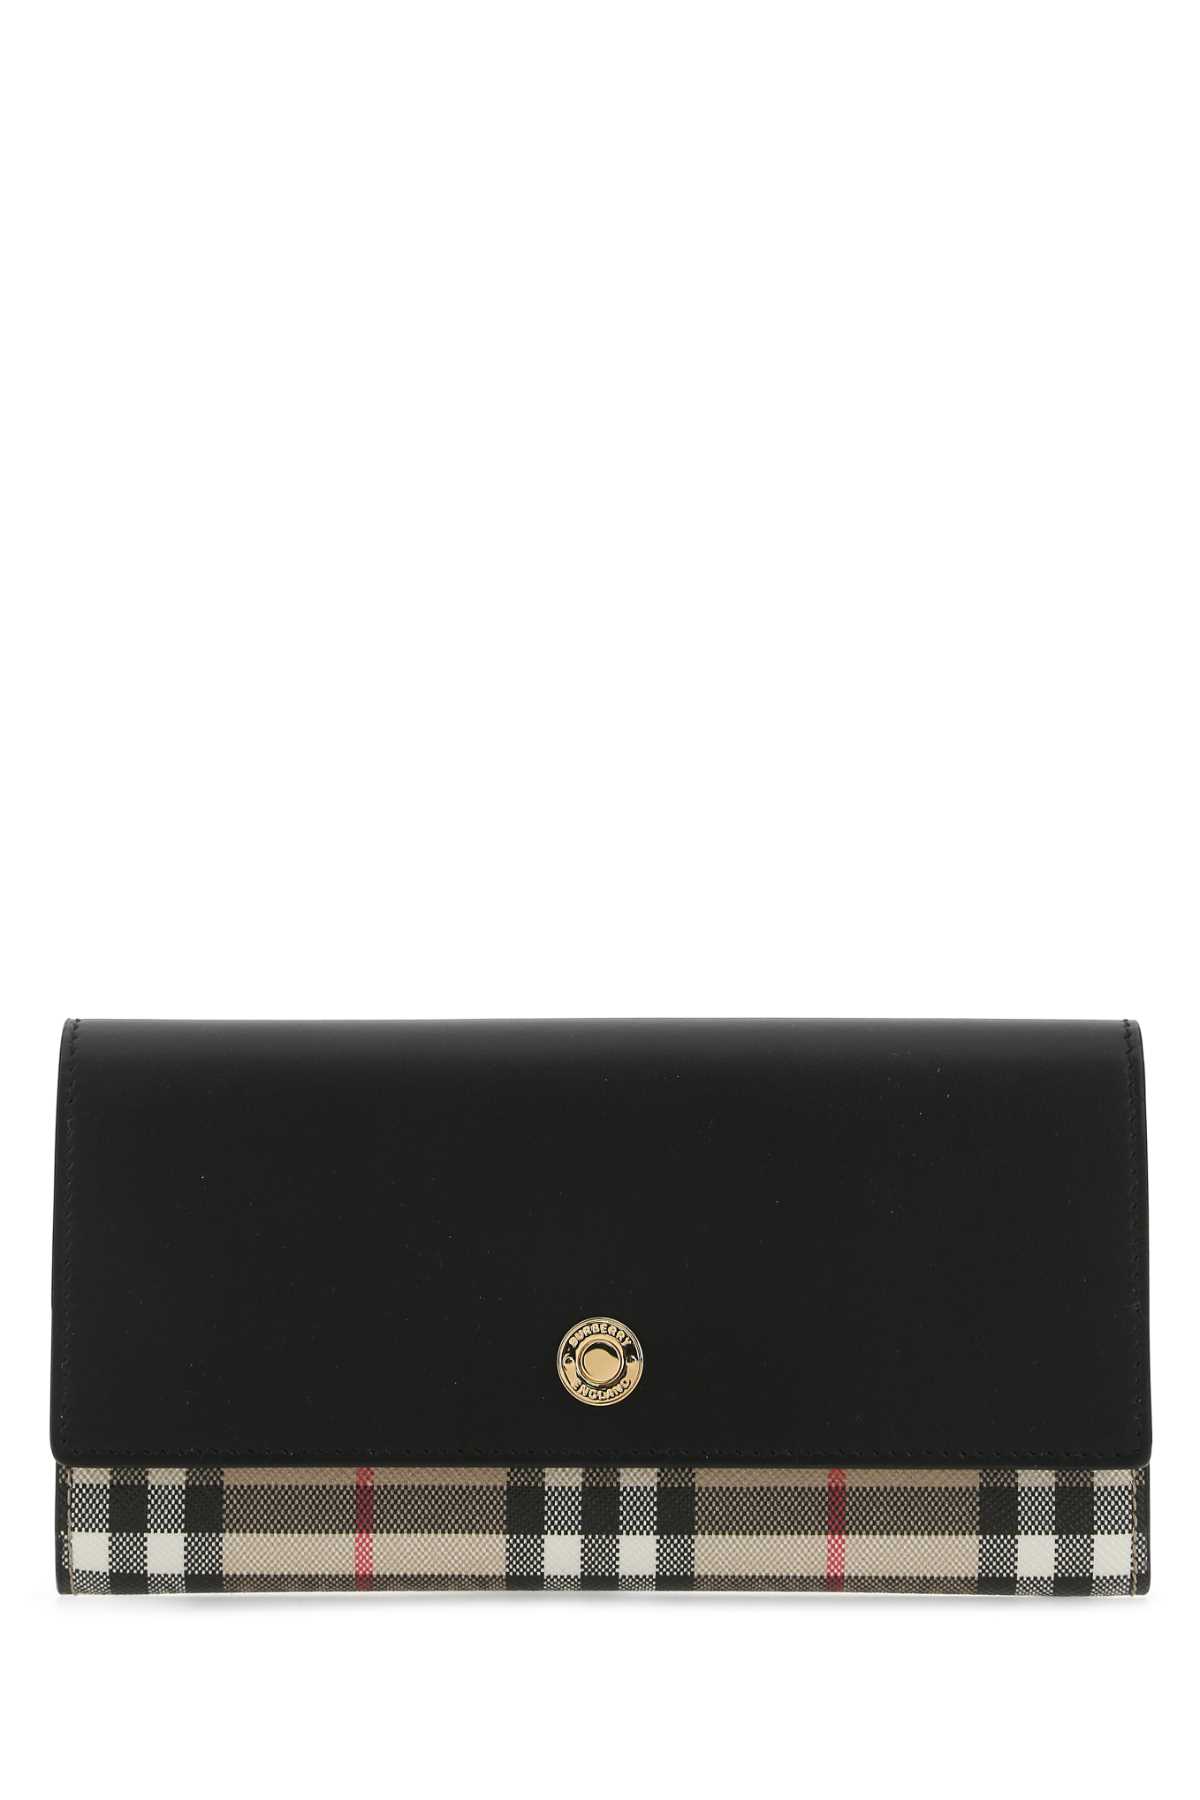 Burberry Multicolor E-canvas And Leather Wallet